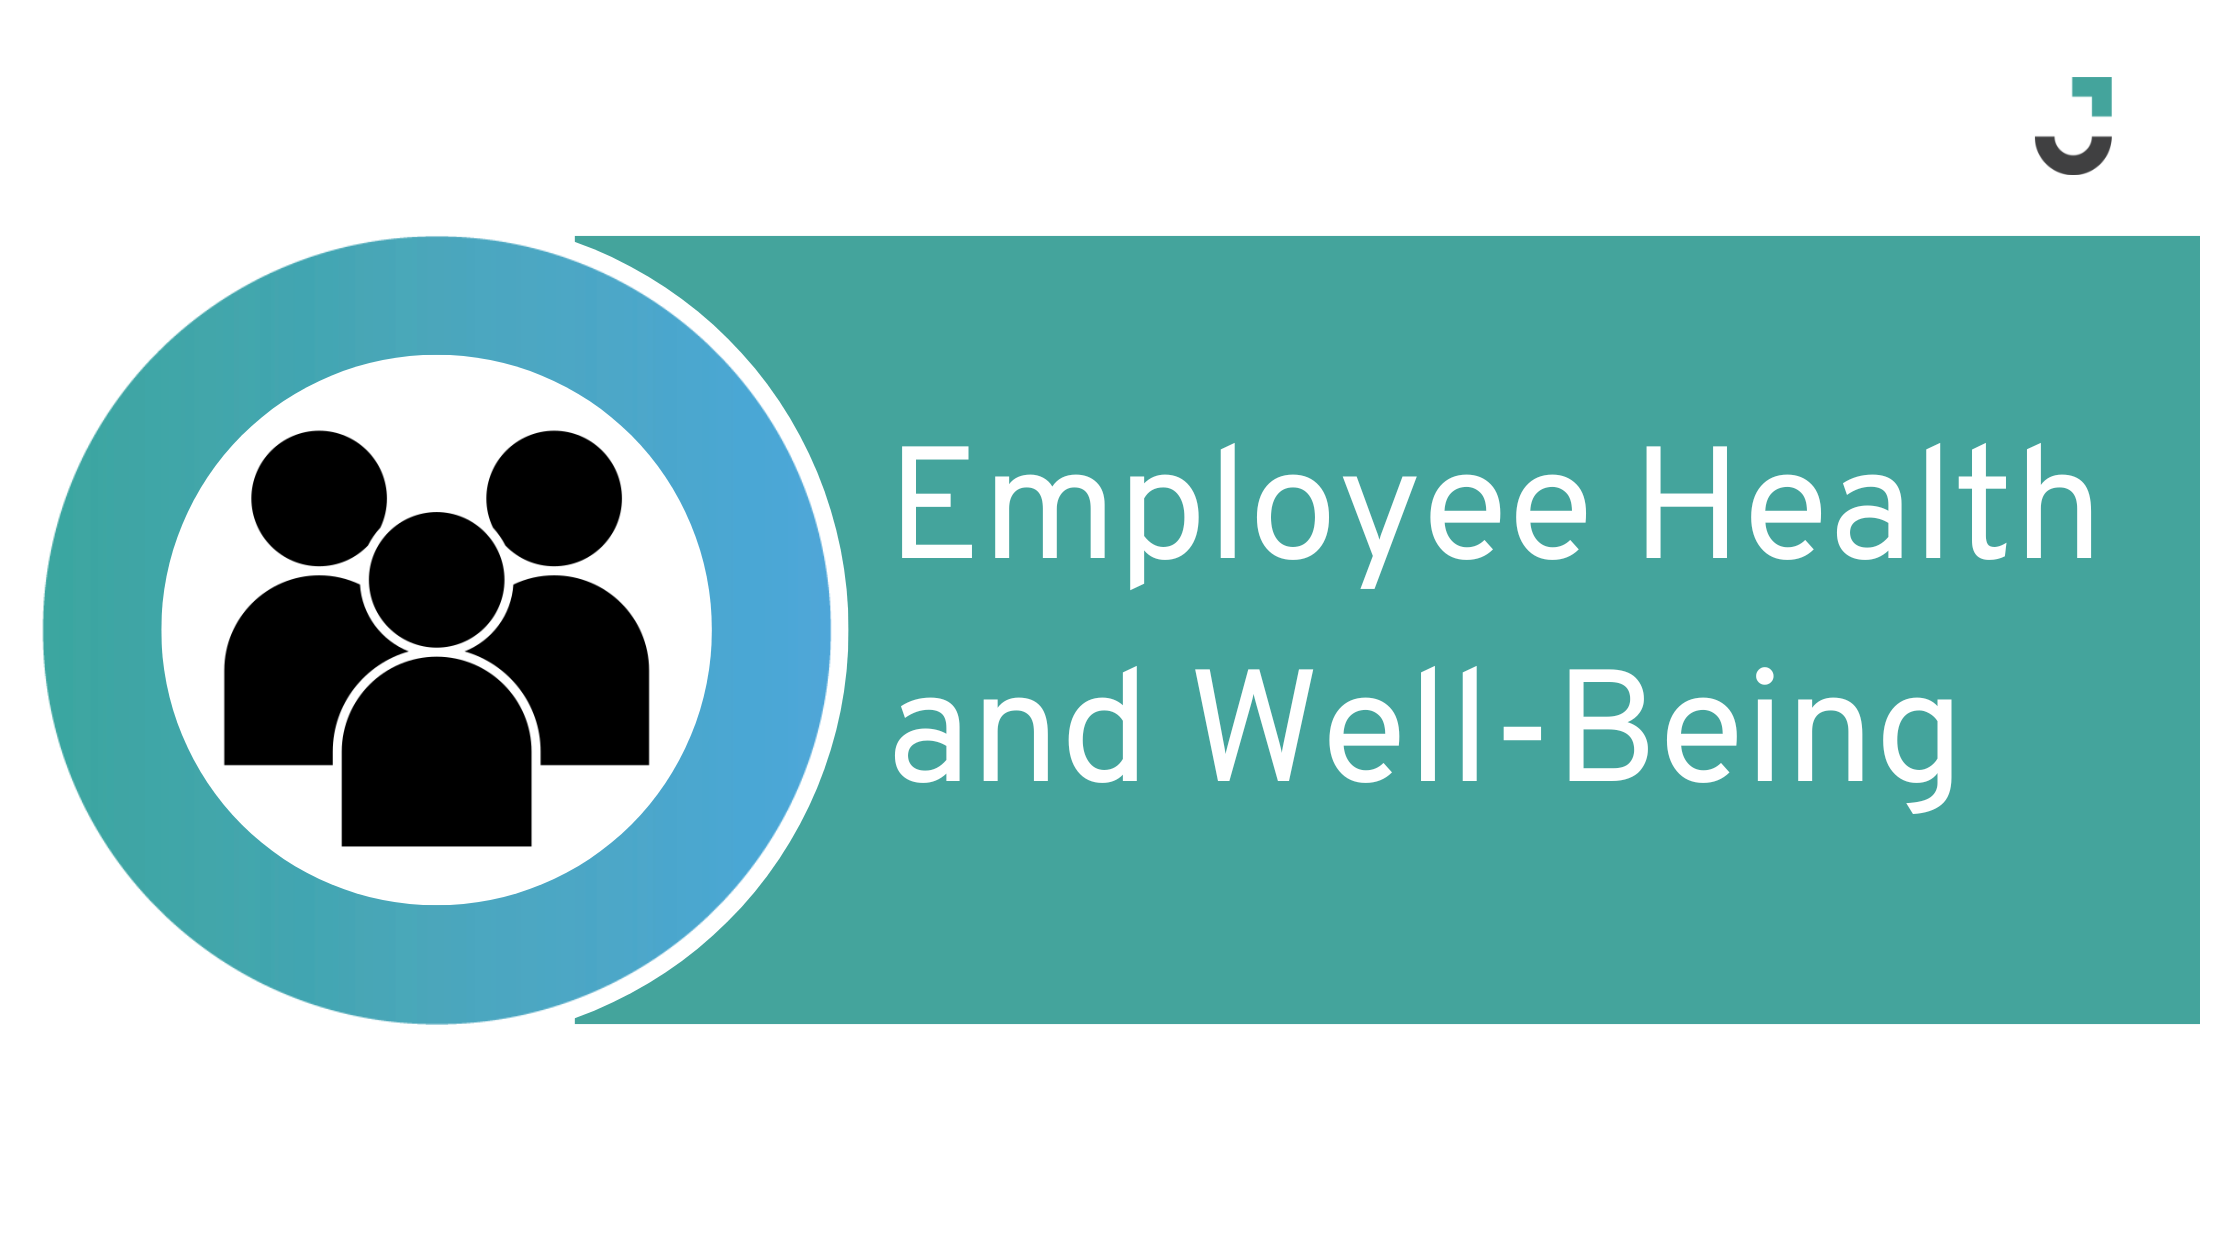 Employee Health and Well-Being